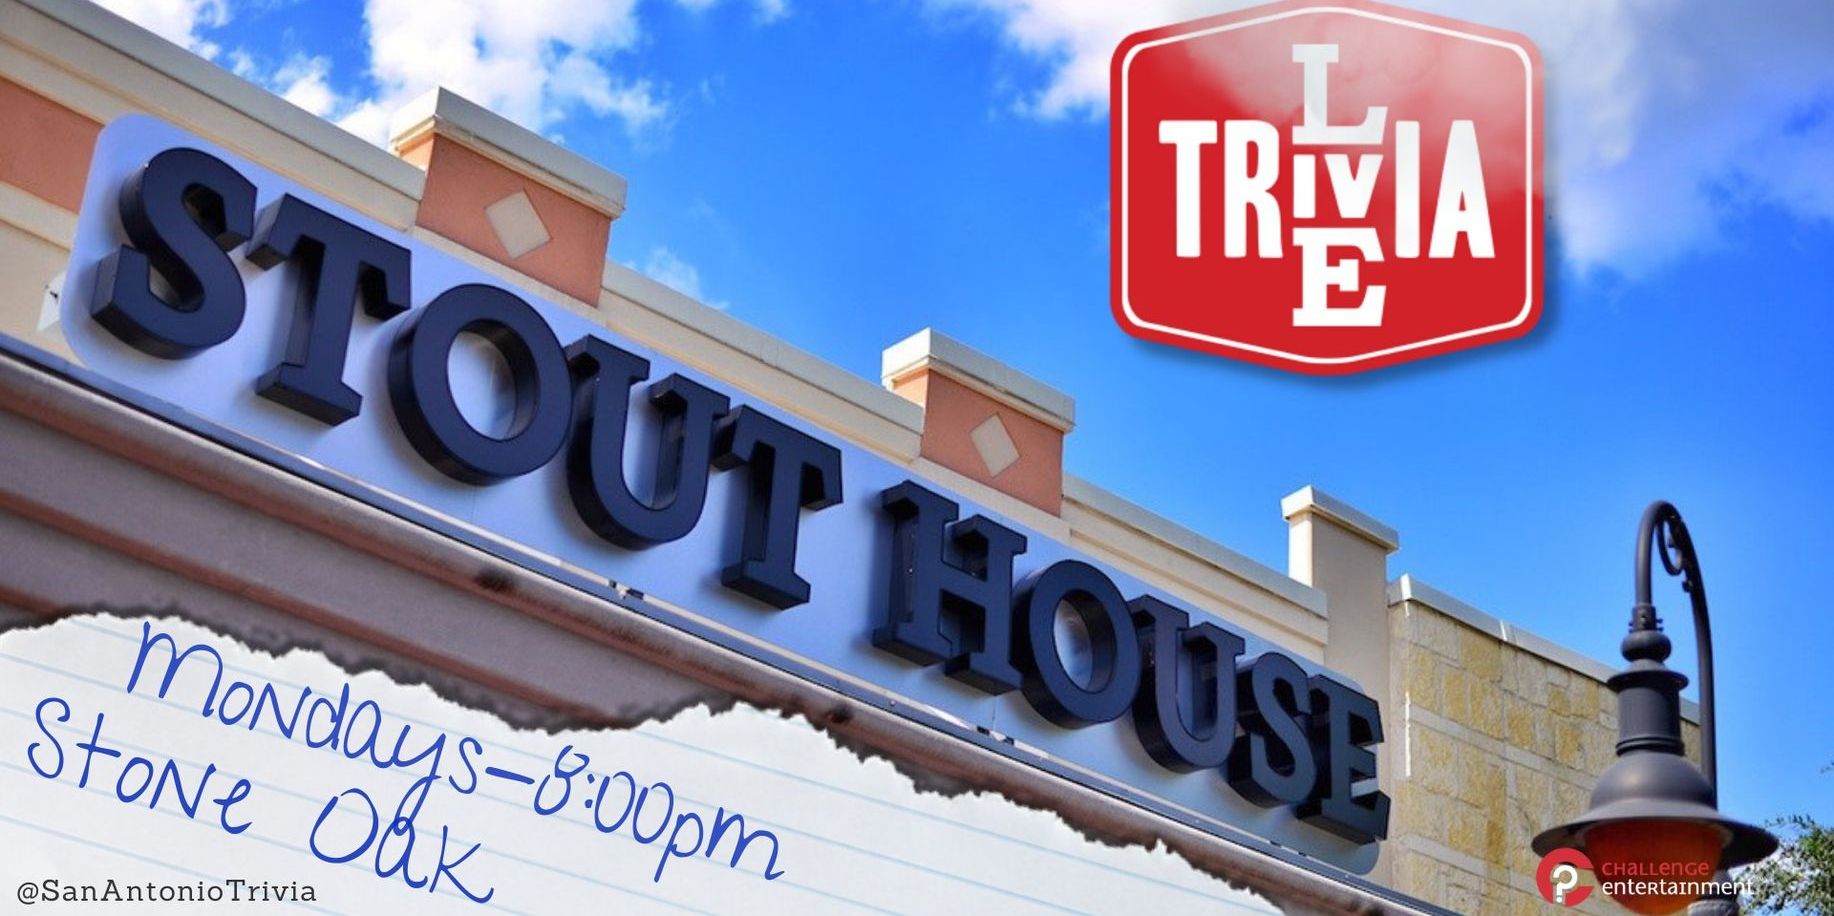 Live Trivia at Stout House promotional image